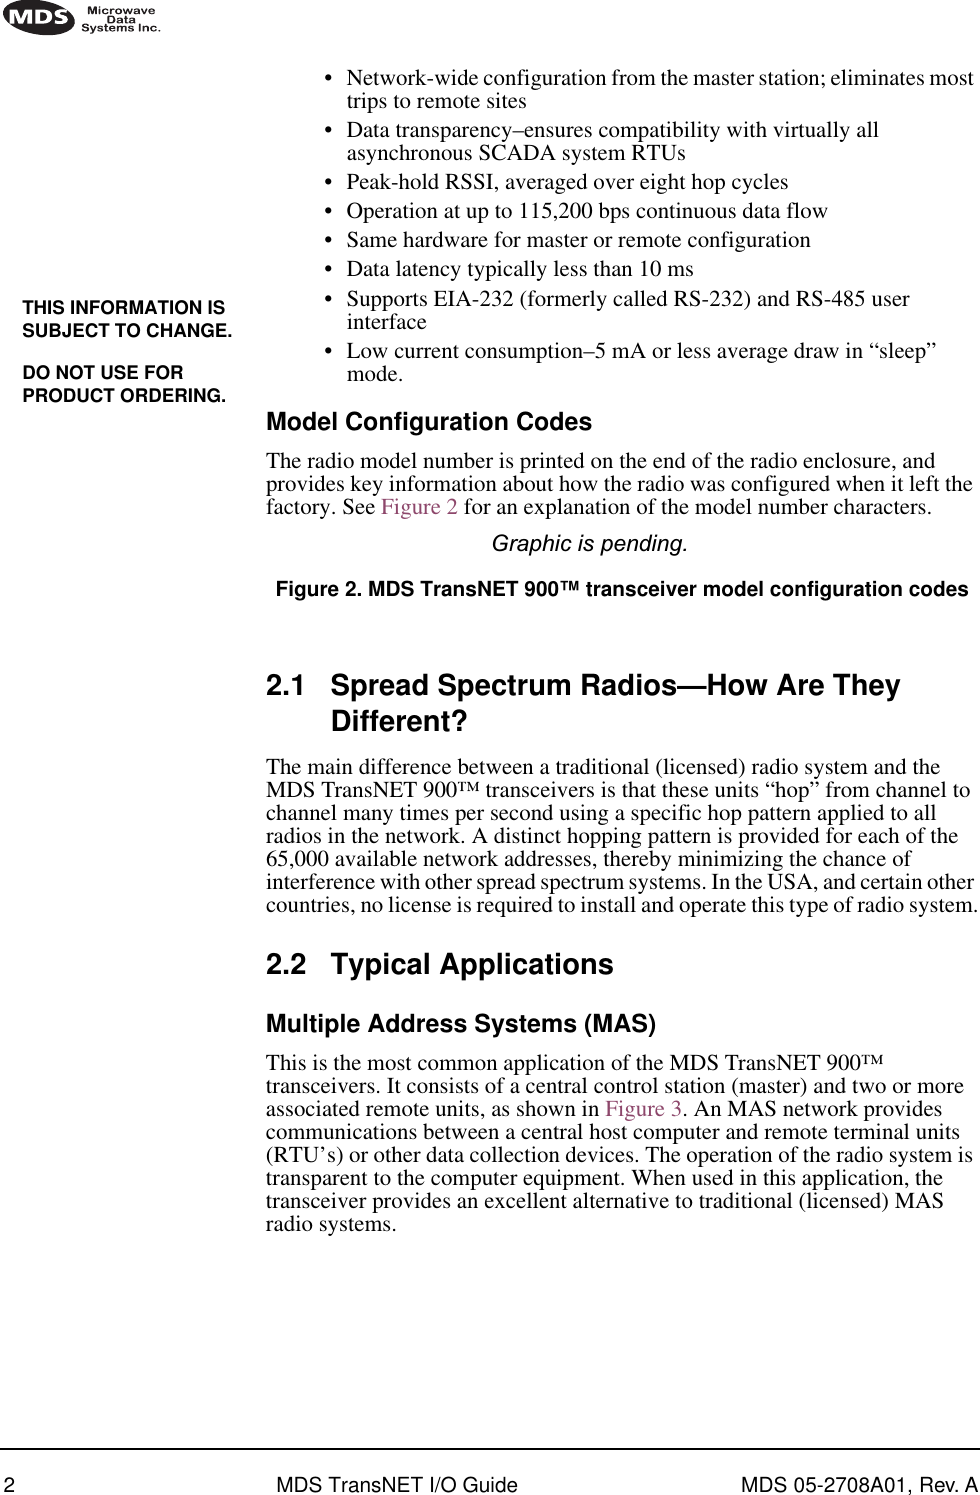  2 MDS TransNET I/O Guide MDS 05-2708A01, Rev. A        •Network-wide configuration from the master station; eliminates most trips to remote sites•Data transparency–ensures compatibility with virtually all asynchronous SCADA system RTUs•Peak-hold RSSI, averaged over eight hop cycles•Operation at up to 115,200 bps continuous data flow•Same hardware for master or remote configuration•Data latency typically less than 10 ms•Supports EIA-232 (formerly called RS-232) and RS-485 user interface•Low current consumption–5 mA or less average draw in “sleep” mode. Model Configuration Codes The radio model number is printed on the end of the radio enclosure, and provides key information about how the radio was configured when it left the factory. See Figure 2 for an explanation of the model number characters. Graphic is pending.  Figure 2. MDS TransNET 900™ transceiver model configuration codes Invisible place holder 2.1 Spread Spectrum Radios—How Are They Different? The main difference between a traditional (licensed) radio system and the MDS TransNET 900™ transceivers is that these units “hop” from channel to channel many times per second using a specific hop pattern applied to all radios in the network. A distinct hopping pattern is provided for each of the 65,000 available network addresses, thereby minimizing the chance of interference with other spread spectrum systems. In the USA, and certain other countries, no license is required to install and operate this type of radio system. 2.2 Typical Applications Multiple Address Systems (MAS) This is the most common application of the MDS TransNET 900™ transceivers. It consists of a central control station (master) and two or more associated remote units, as shown in Figure 3. An MAS network provides communications between a central host computer and remote terminal units (RTU’s) or other data collection devices. The operation of the radio system is transparent to the computer equipment. When used in this application, the transceiver provides an excellent alternative to traditional (licensed) MAS radio systems.THIS INFORMATION IS SUBJECT TO CHANGE.DO NOT USE FOR PRODUCT ORDERING.